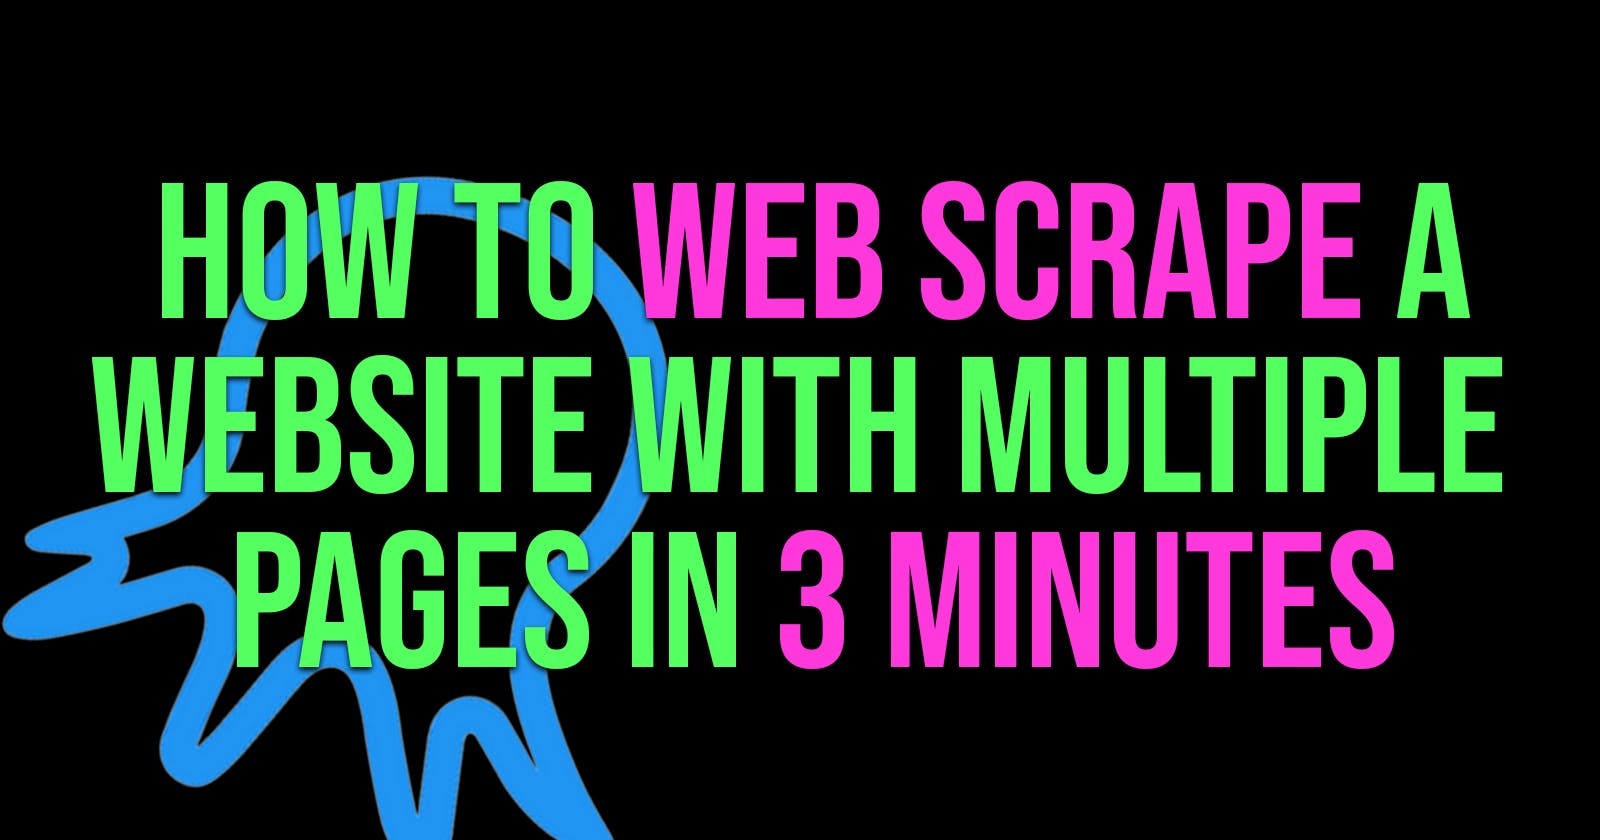 How to scrape a website with multiple pages using Octoparse for FREE (2023)